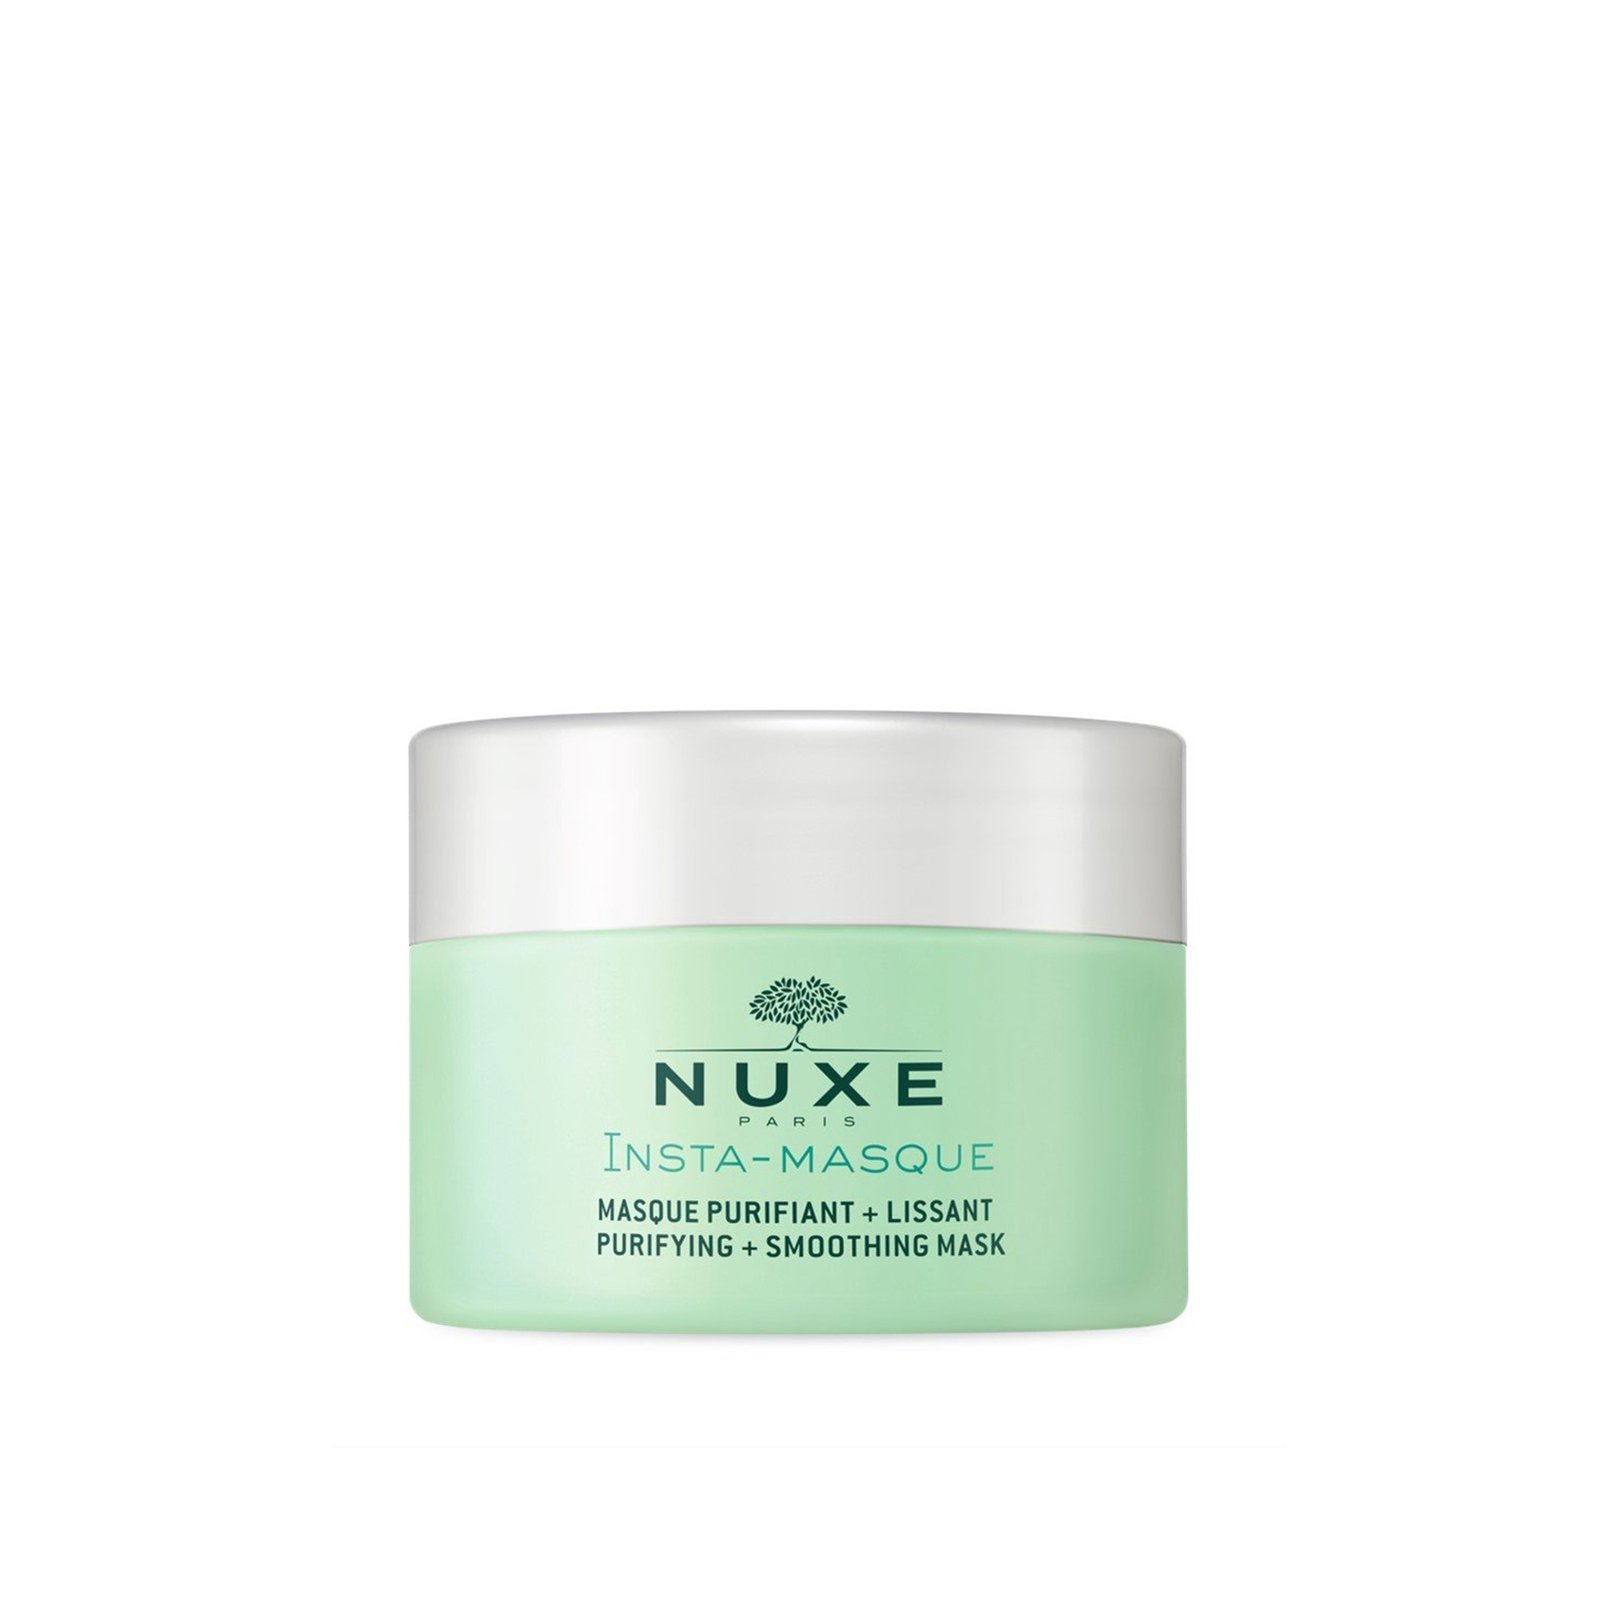 NUXE Insta-Masque Purifying + Smoothing Mask 50ml (1.69fl oz)